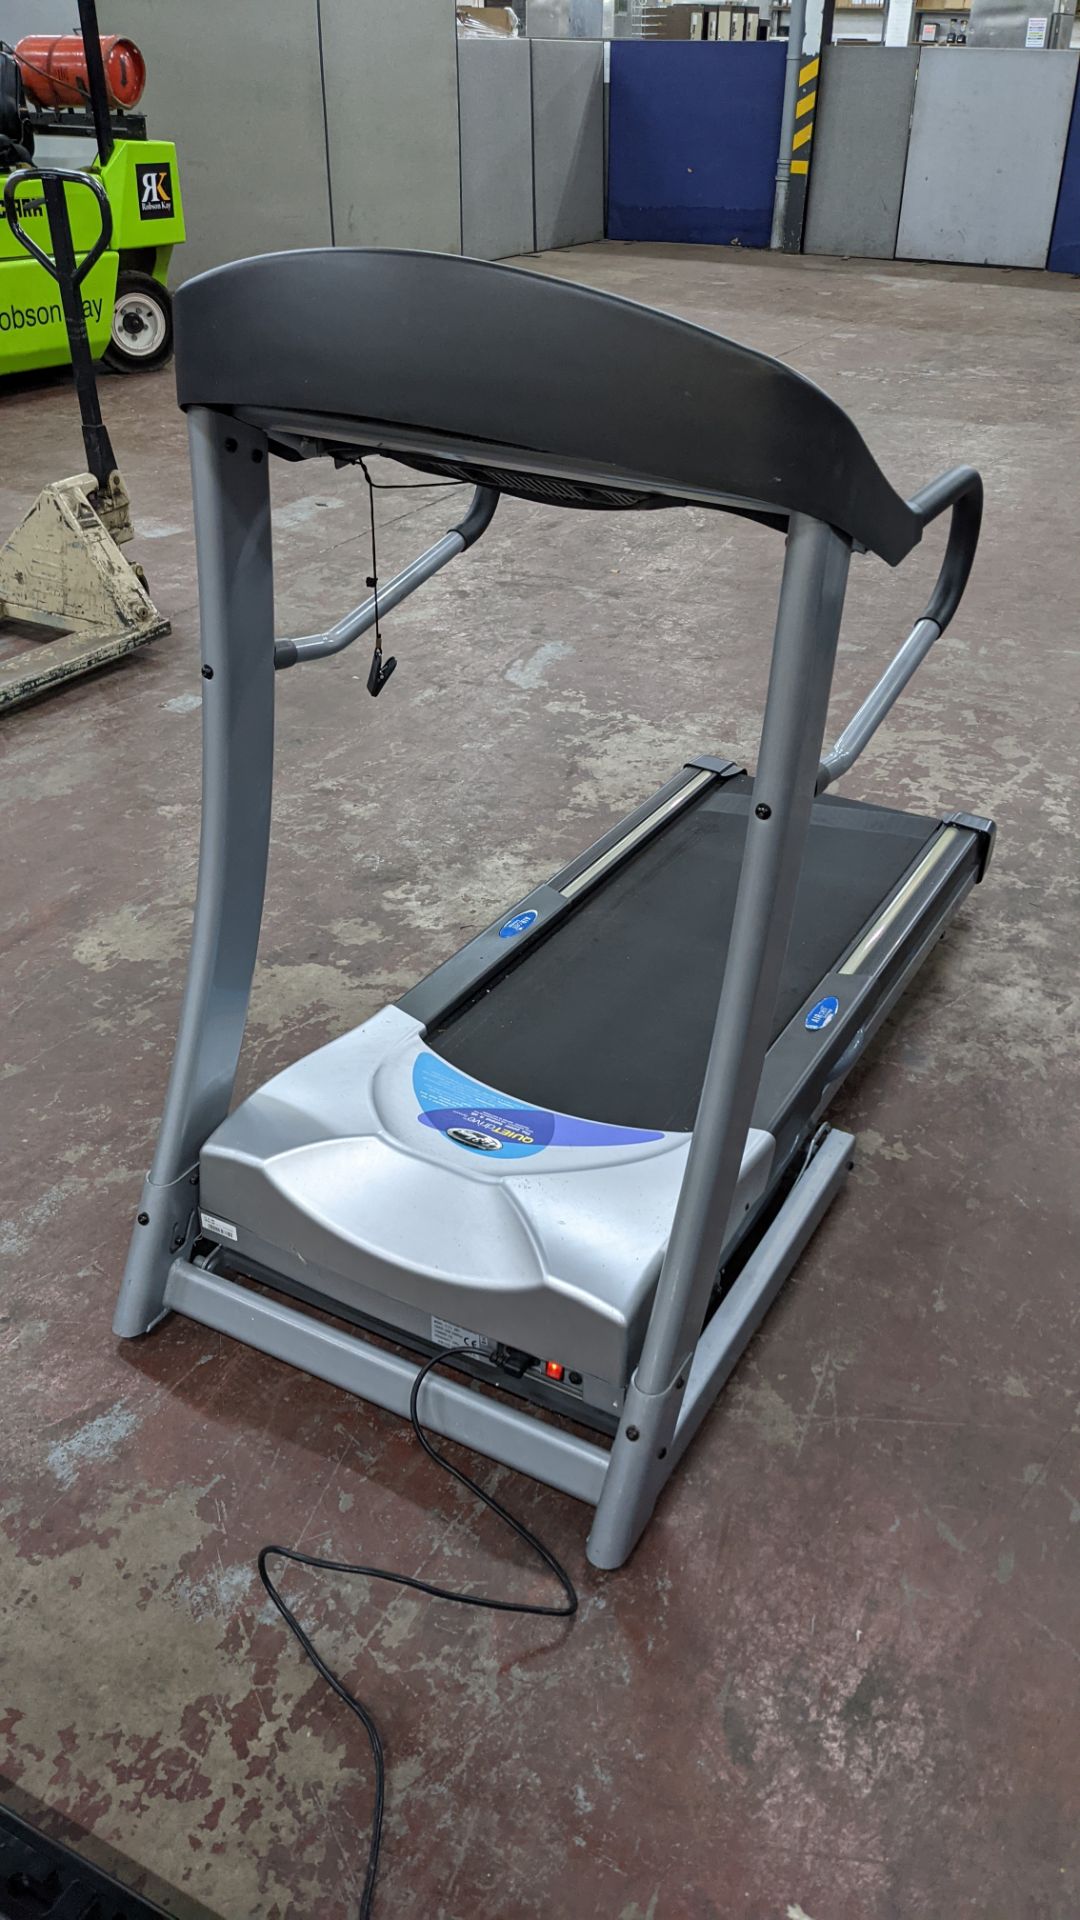 Horizon Fitness Ti31 HRC Treadmill - folds up for easy storage - Image 13 of 18